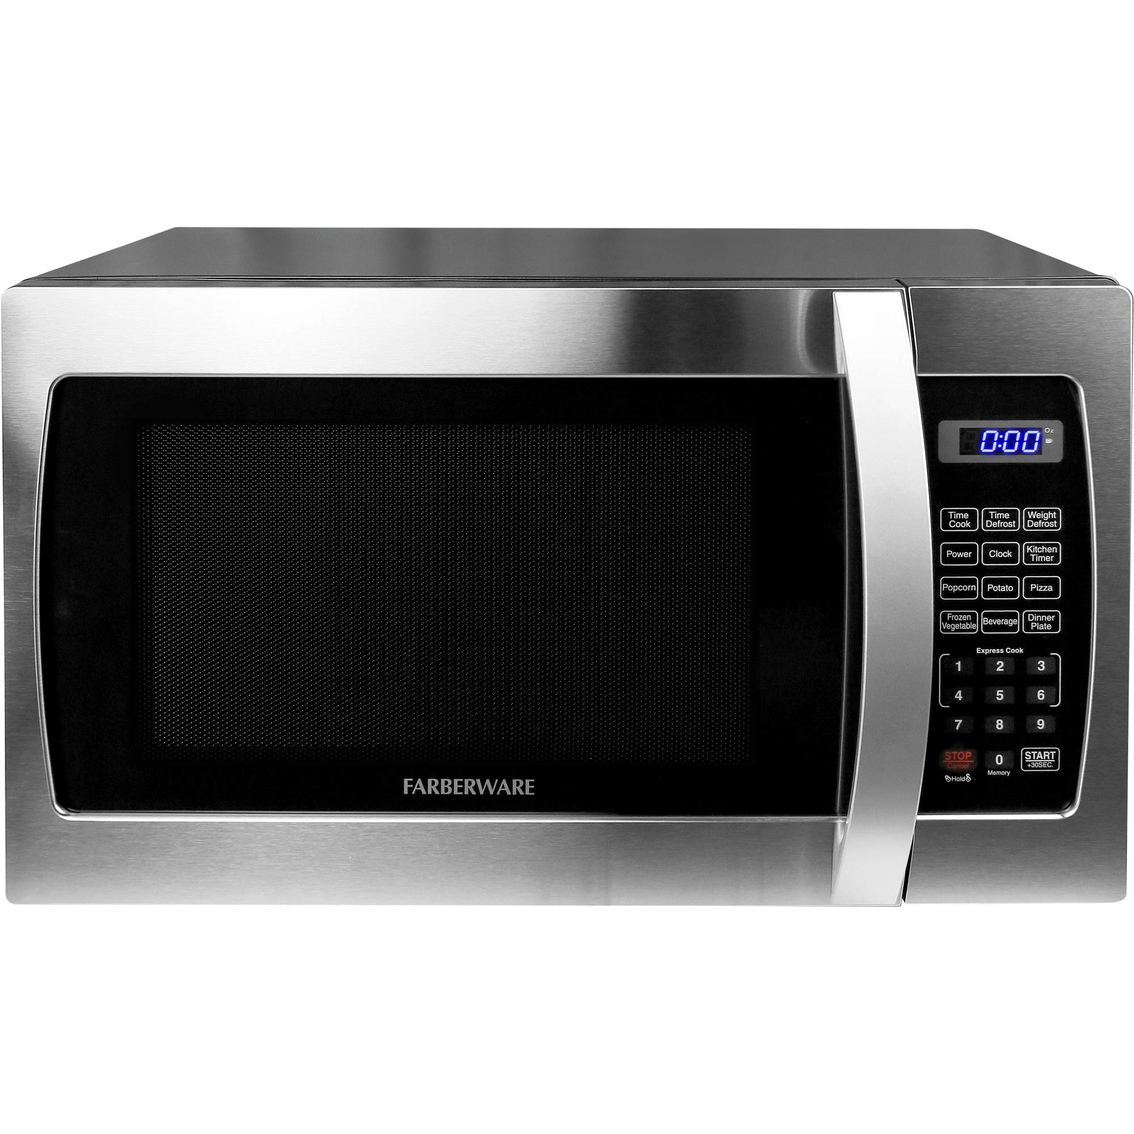 Farberware Professional 1.3 cu. ft. Microwave Oven - Image 3 of 8